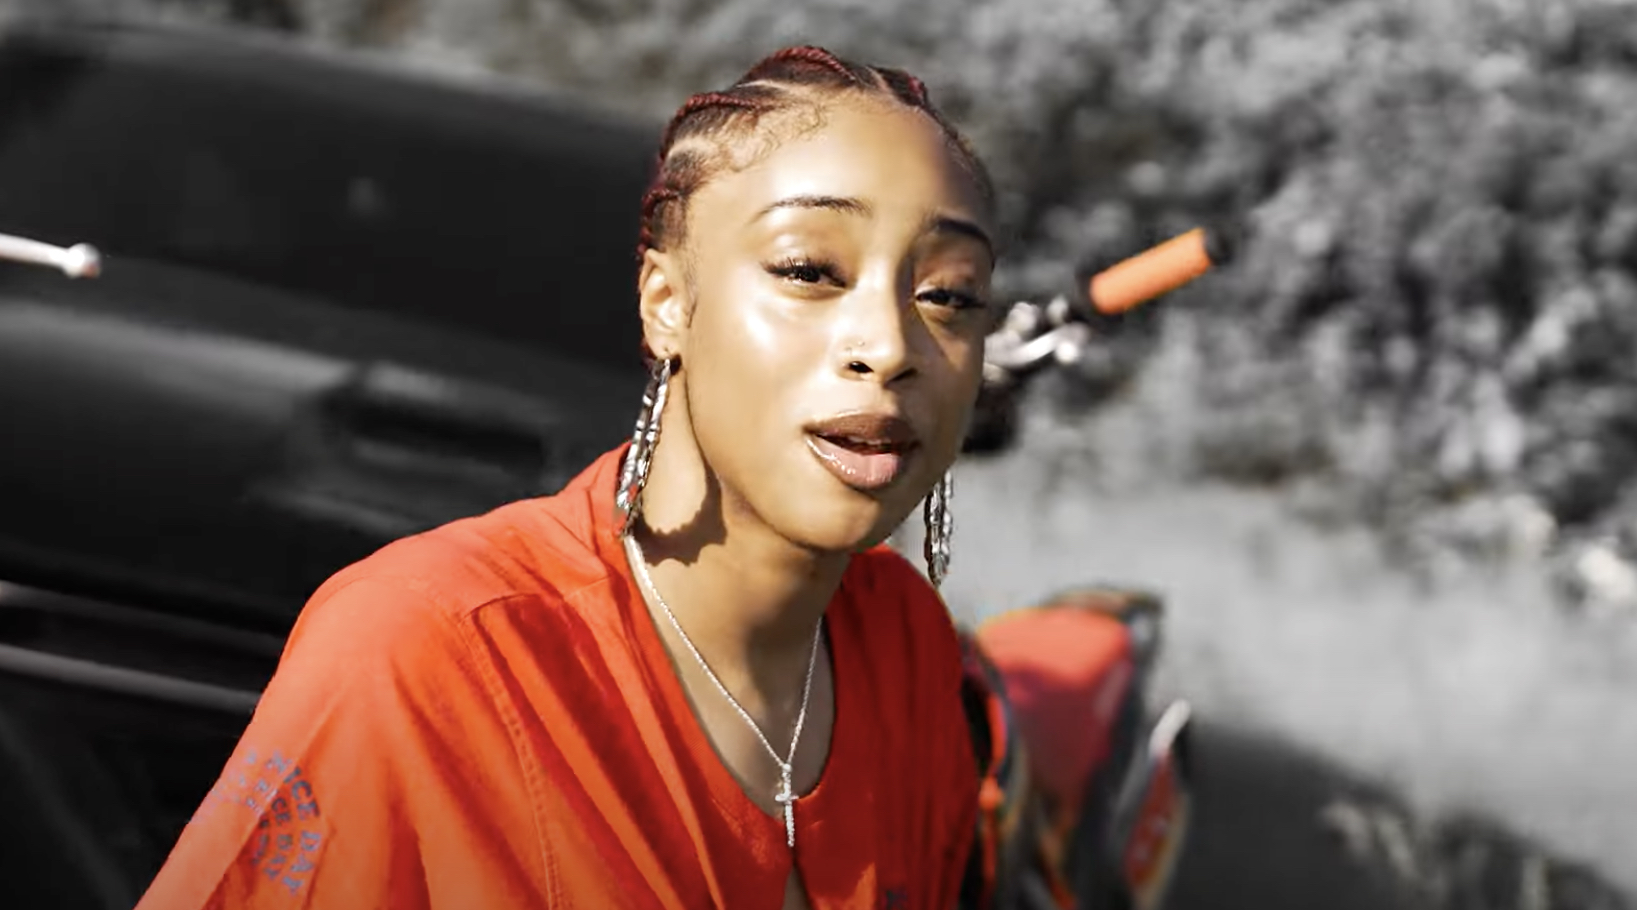 N3lle – “First” (Video)